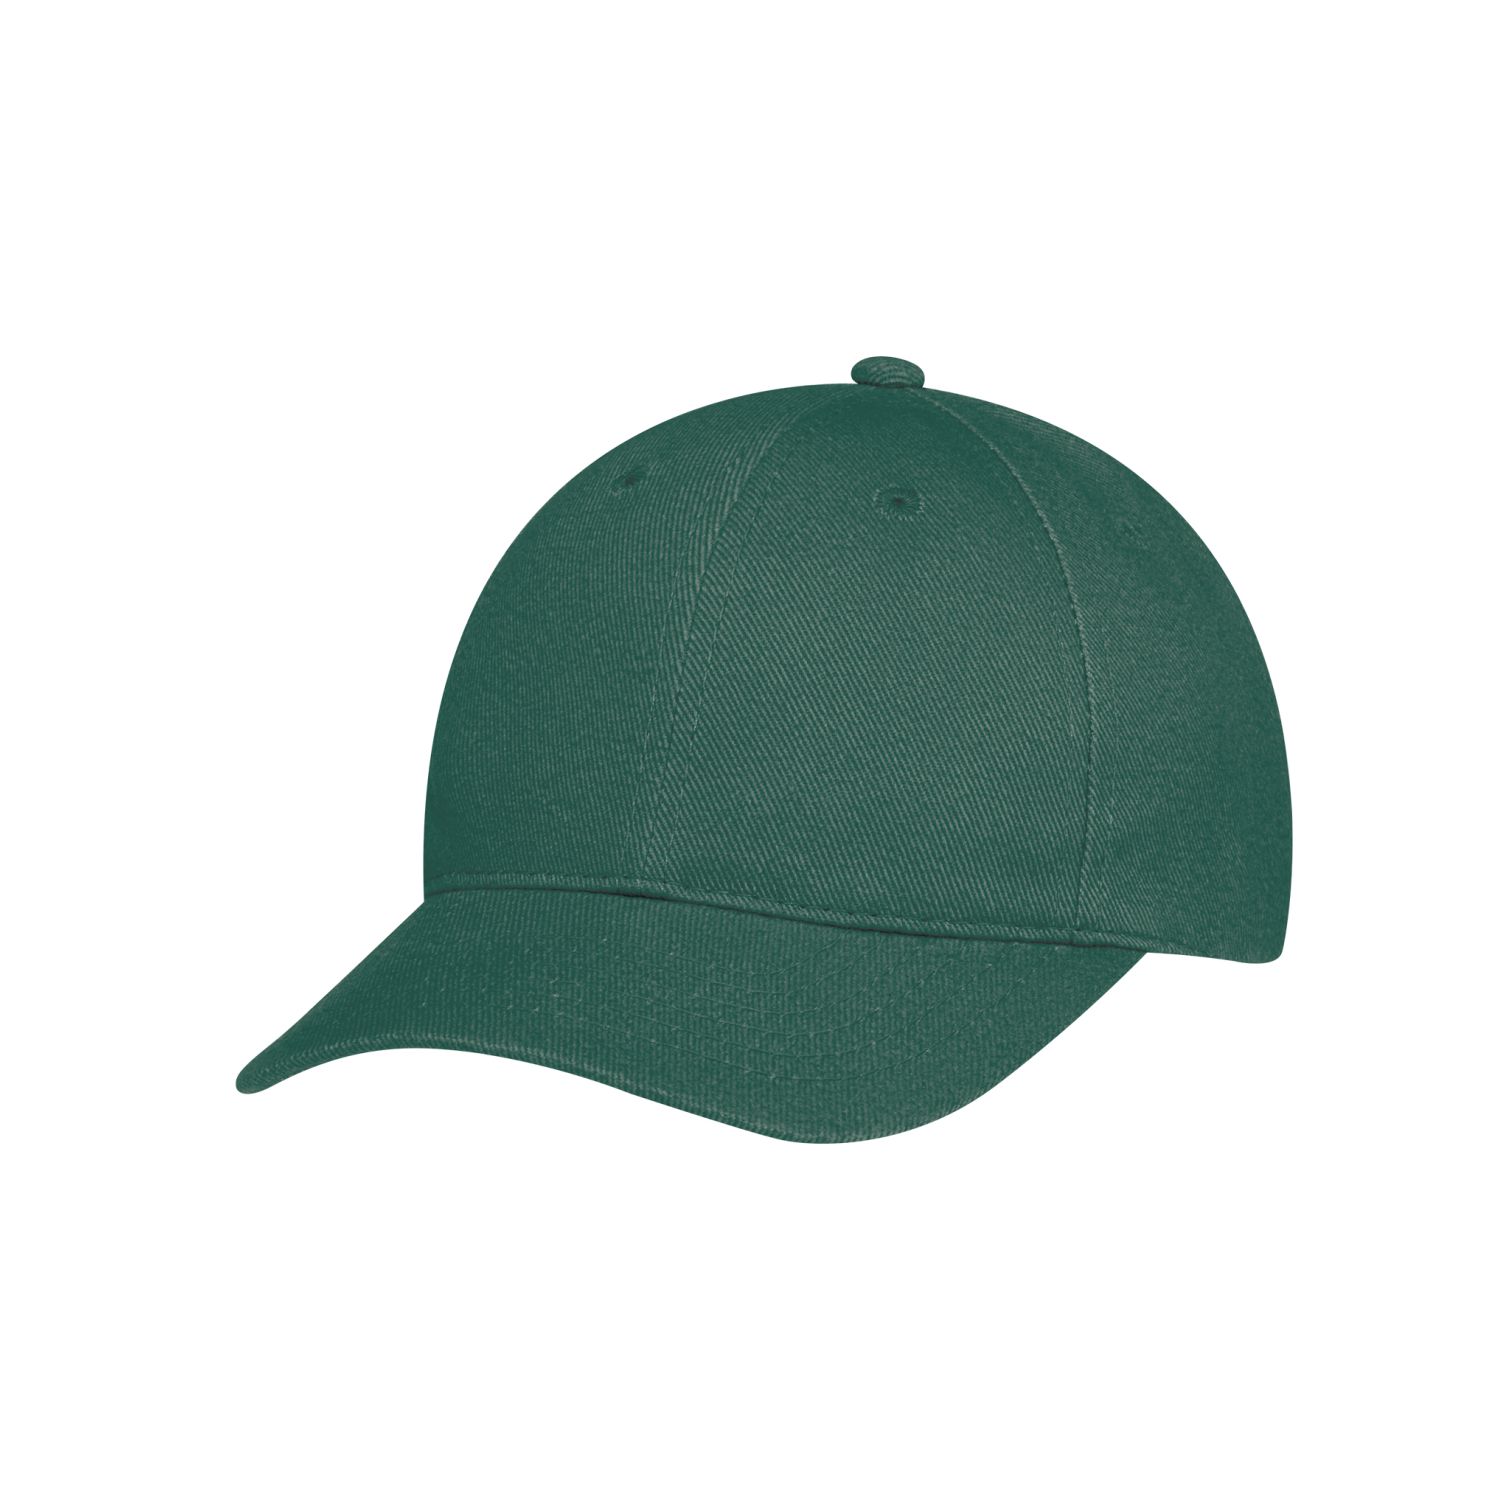 AJM Heavyweight Brushed Cotton Drill 6 Panel Constructed Contour Hat #2C390M Forest Green